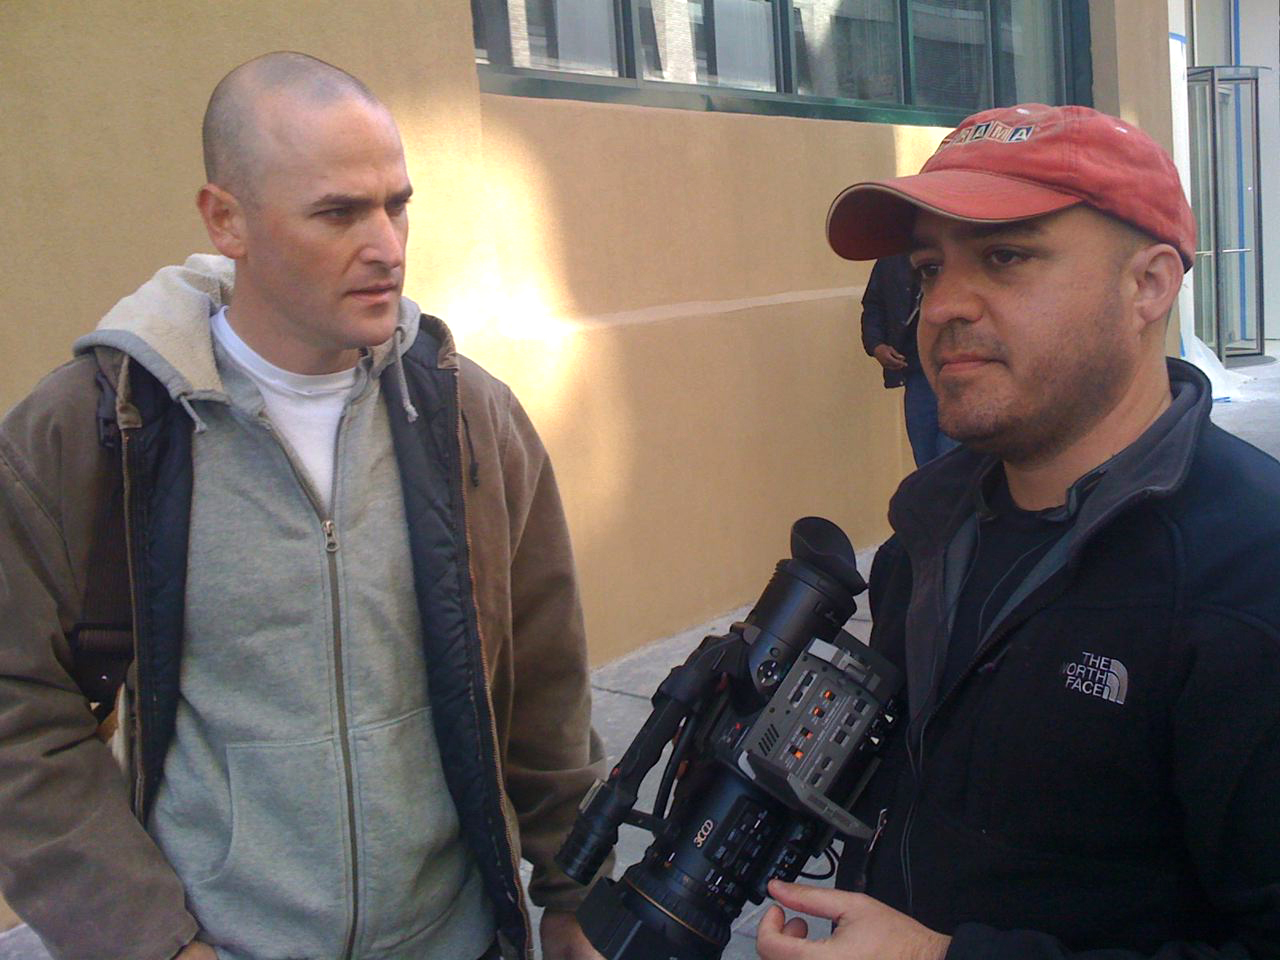 Christopher Martini (Director), discussing a shot with John Rotan (Cinematographer), on the set of 